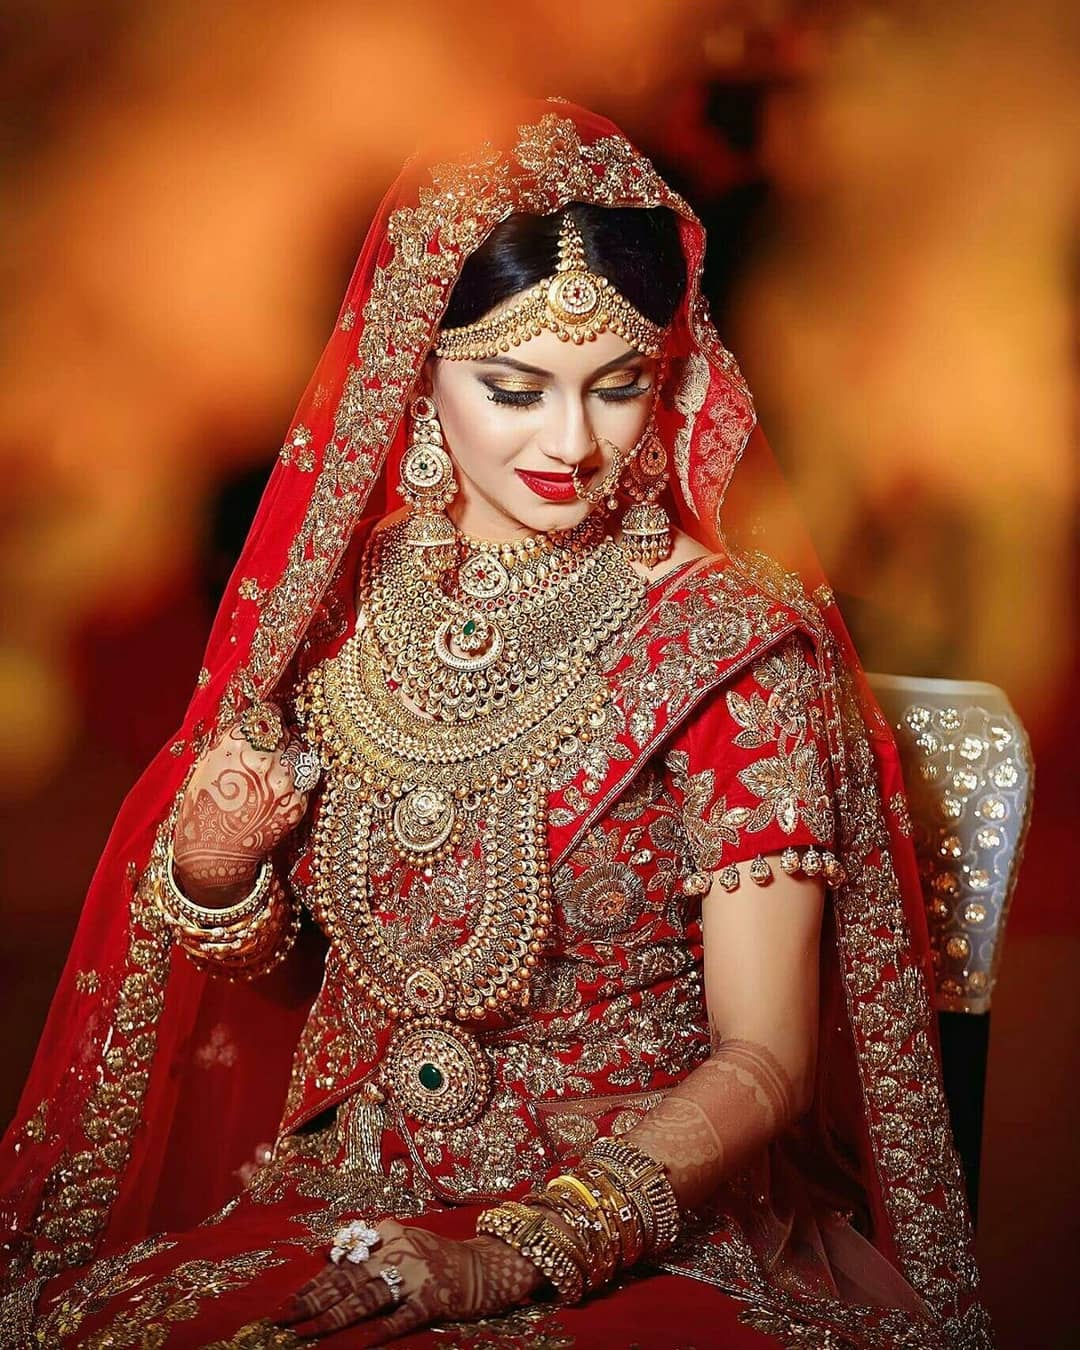 Our Favorite 51 Indian Bridal Makeup Looks 4707